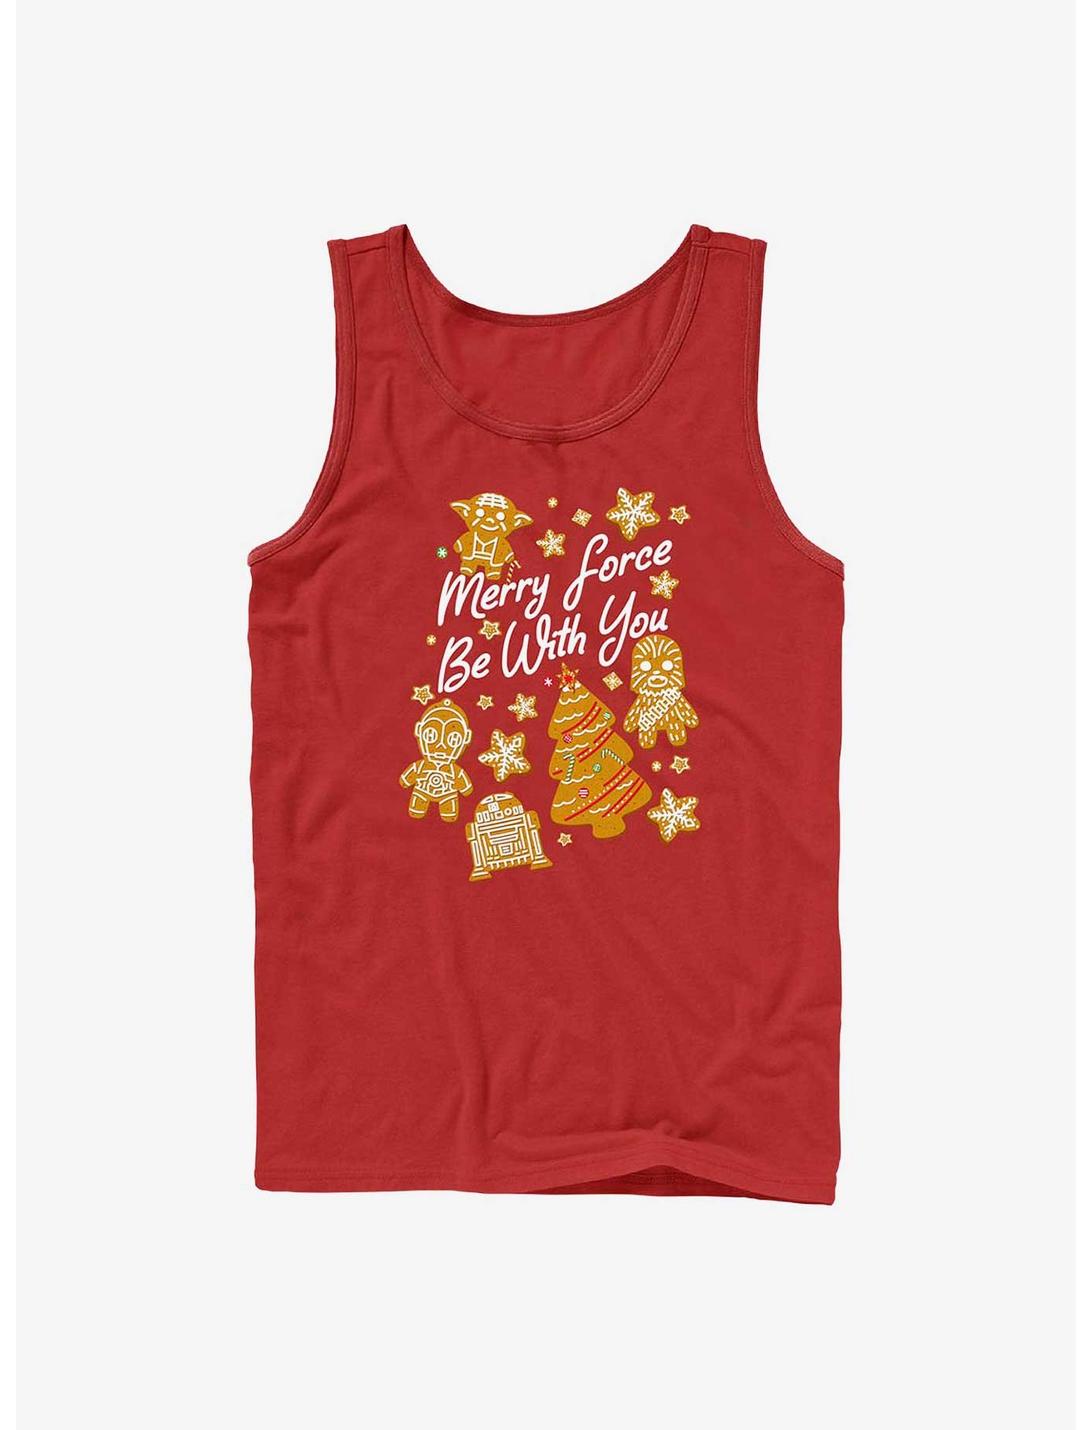 Star Wars Merry Force Be With You Cookies Tank, RED, hi-res